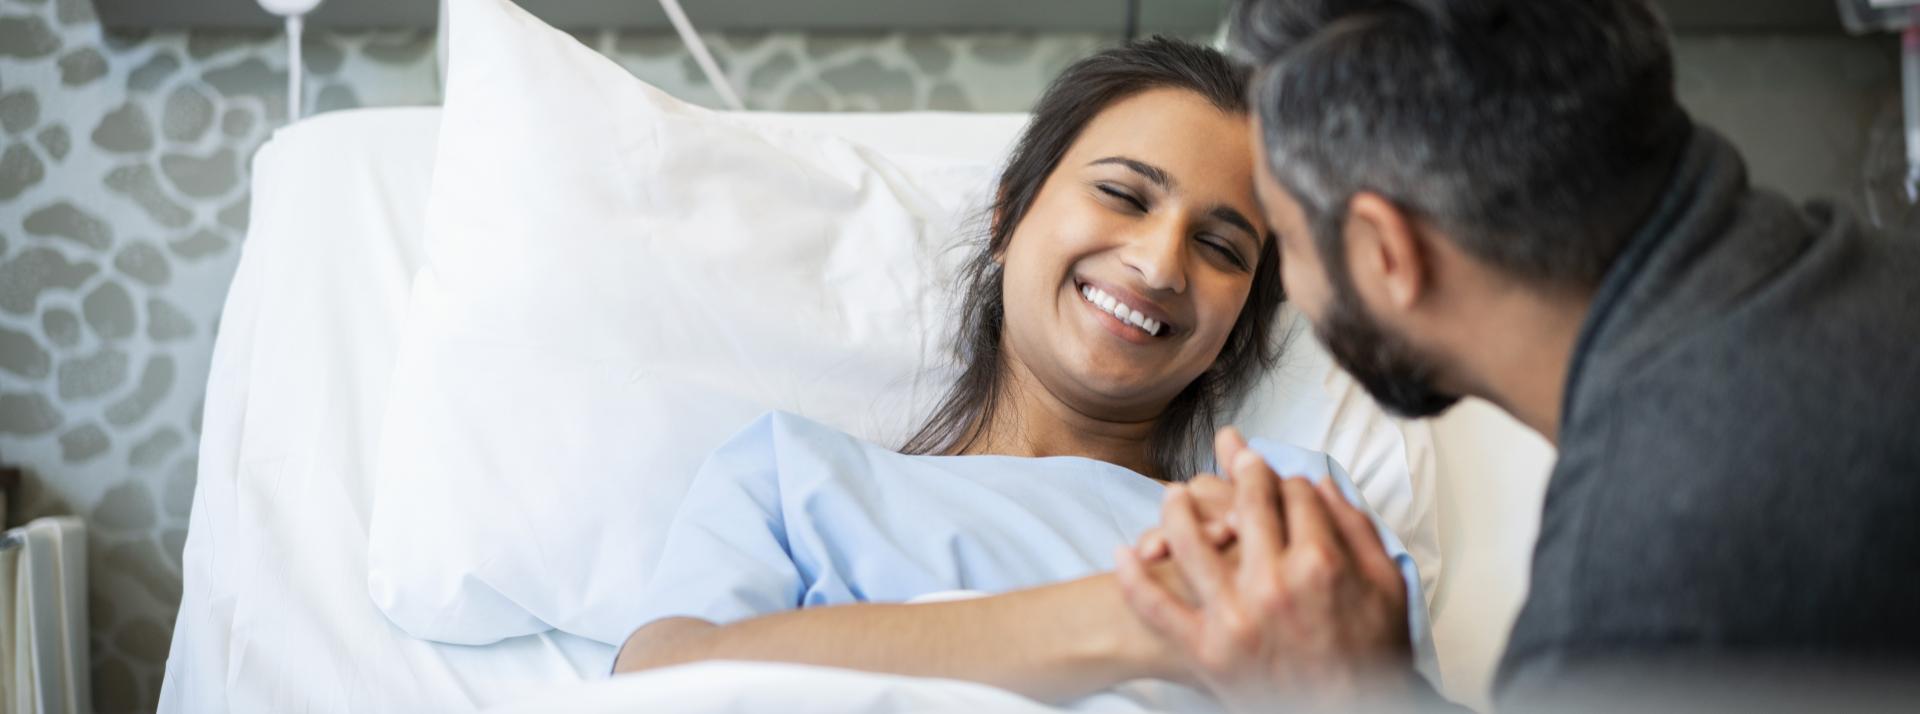 A person visiting someone in the hospital. The patient is lying in bed and smiling